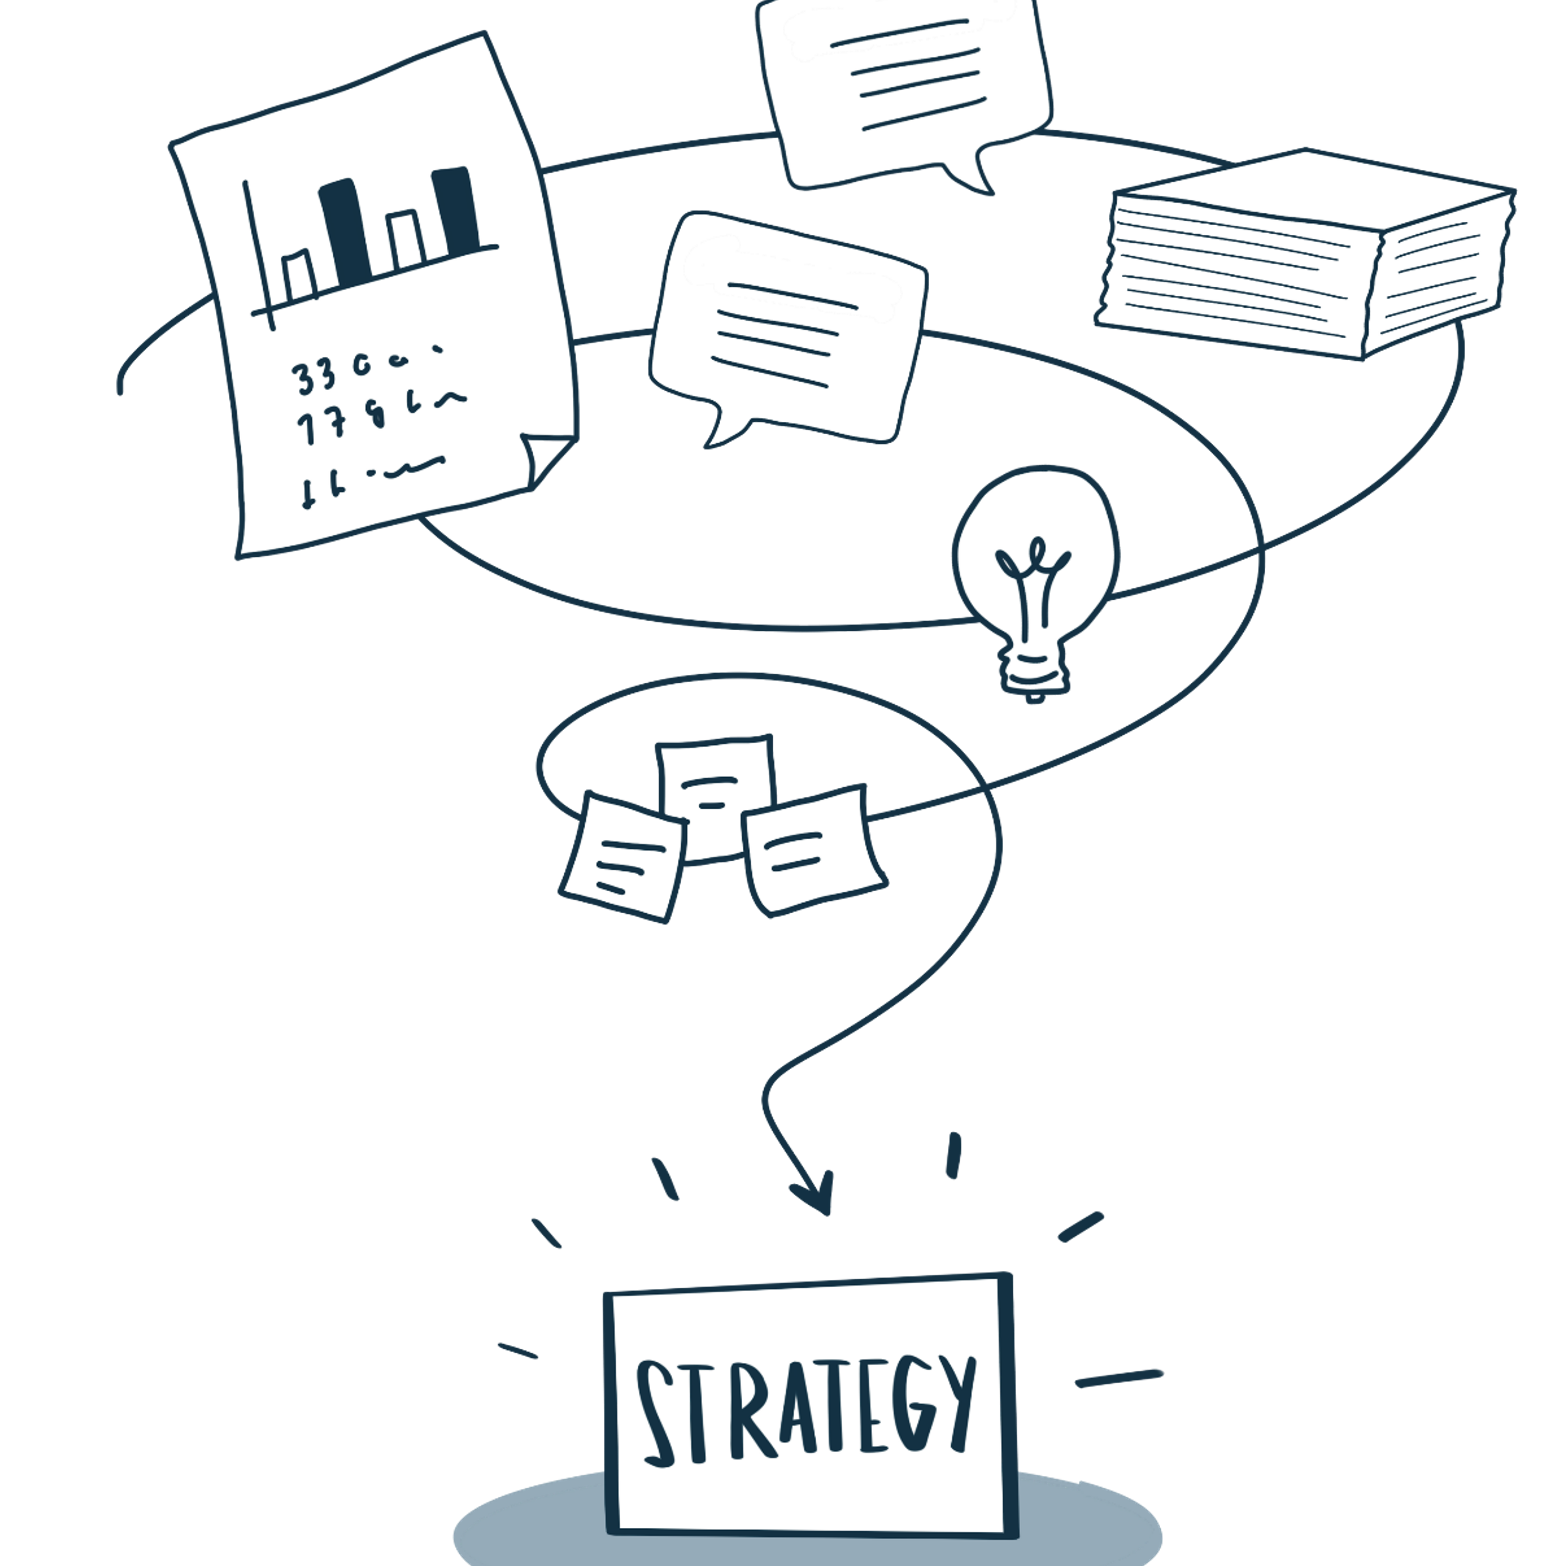 Draw your strategy